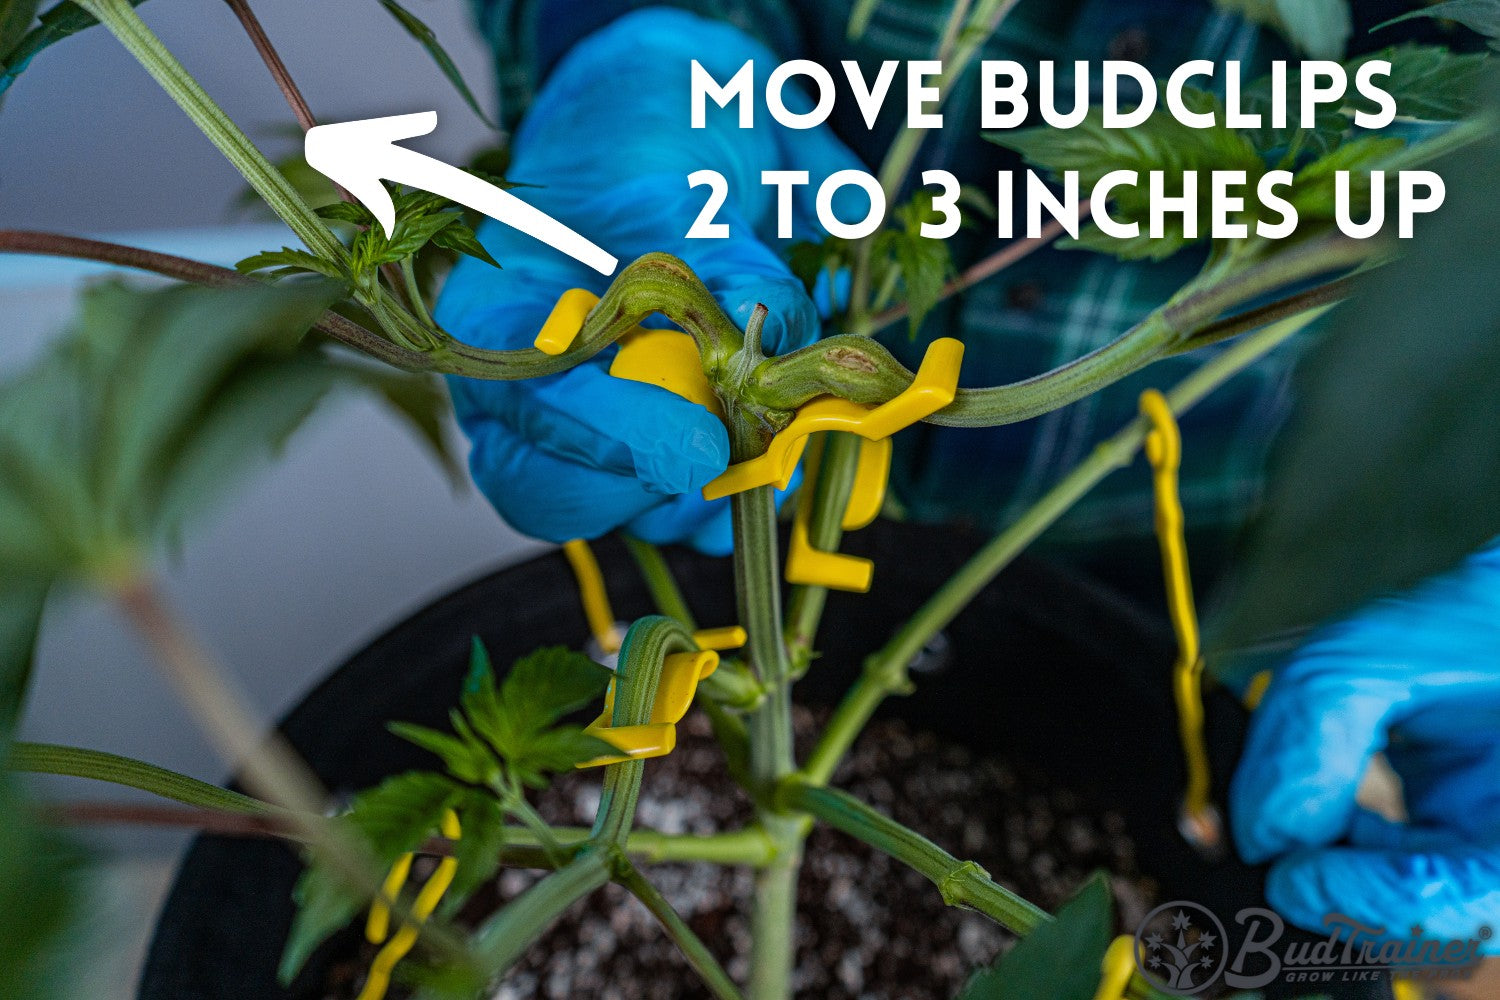 A cannabis plant with a gloved hand moving a yellow BudClip 2 to 3 inches up the branch. The text reads, “MOVE BUDCLIPS 2 TO 3 INCHES UP” with an arrow pointing to the new position.